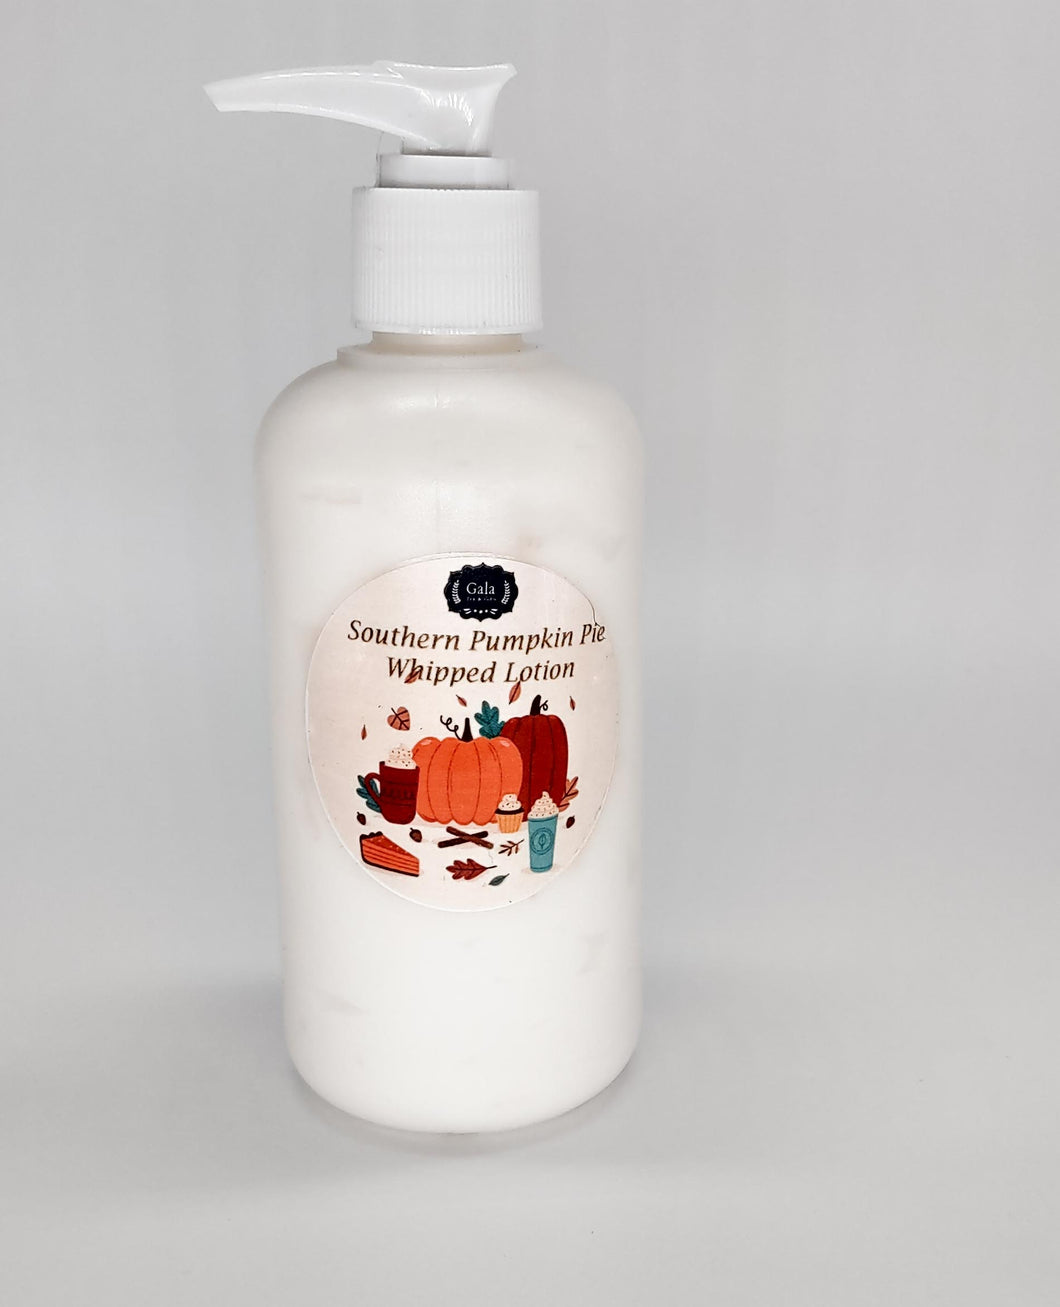 Southern Pumpkin Pie Whipped Lotion